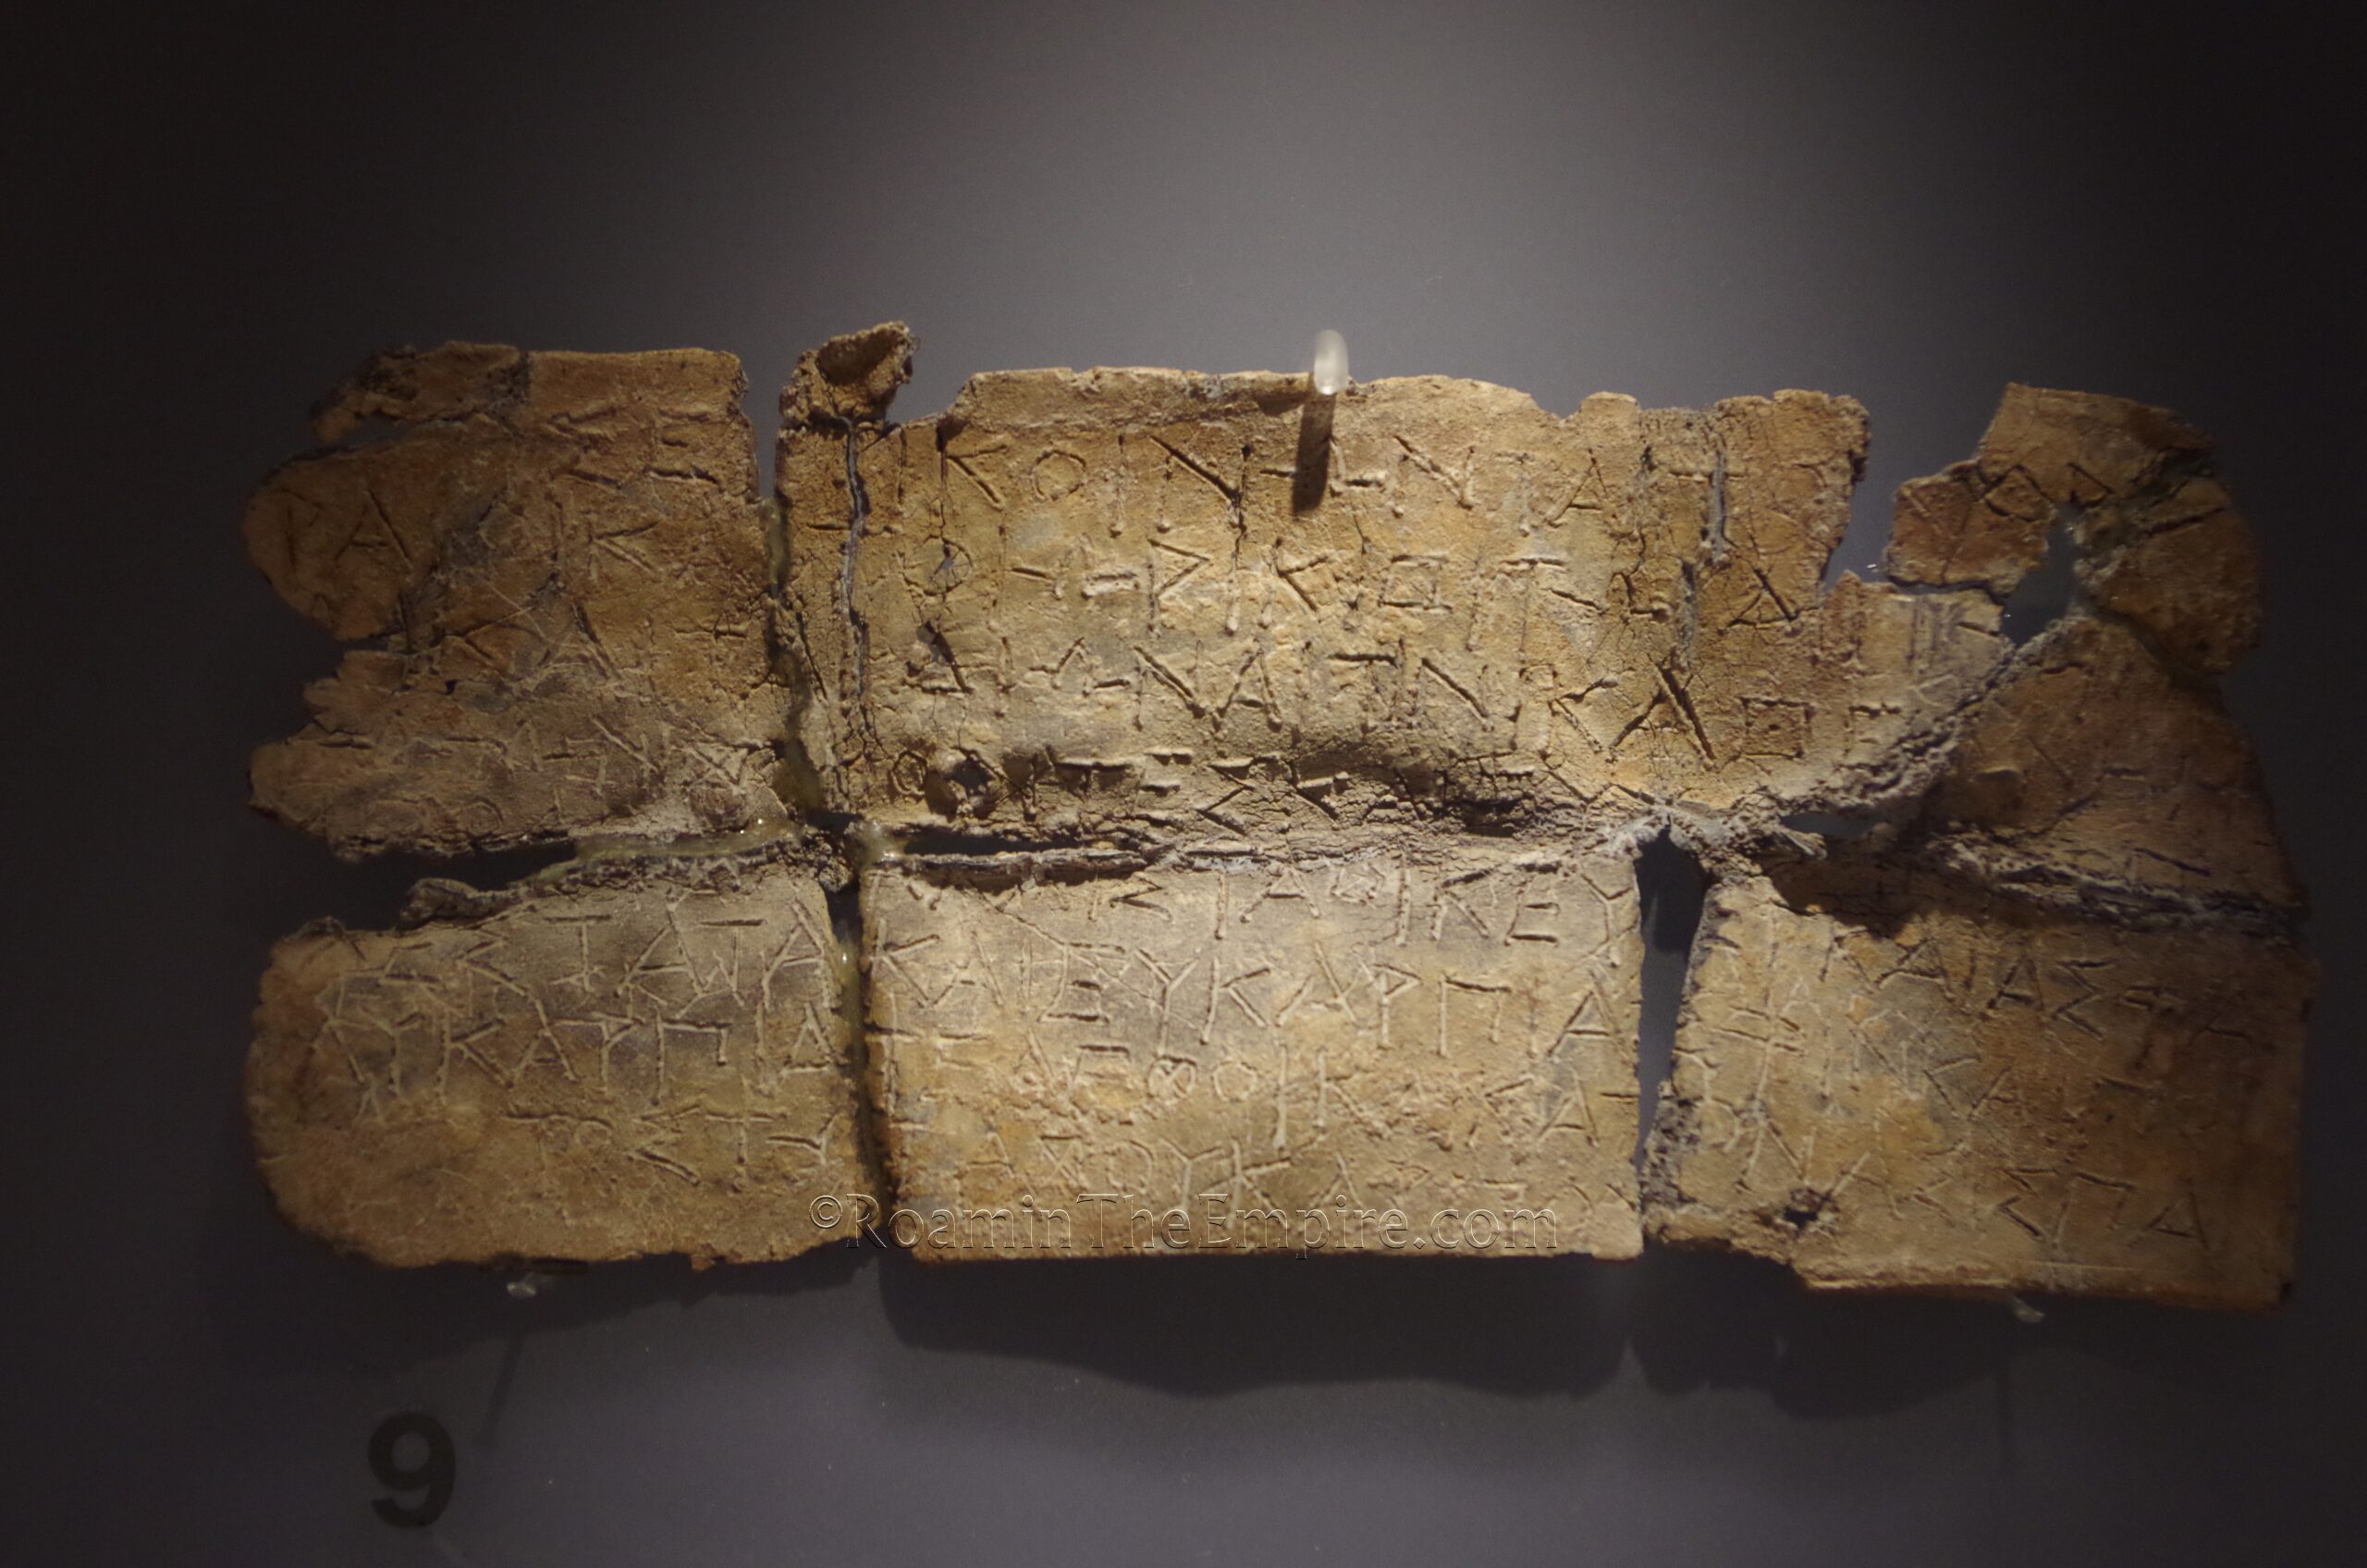 Oracular tablet from Dodona, dated to the second half of the 4th century BCE. On it, the inhabitants of Kerkyra and Oricum ask Zeus Naios and Dione which god or hero they should sacrifice to in order to best rule their lands and enjoy prosperity. Archaeological Museum of Ioannina.